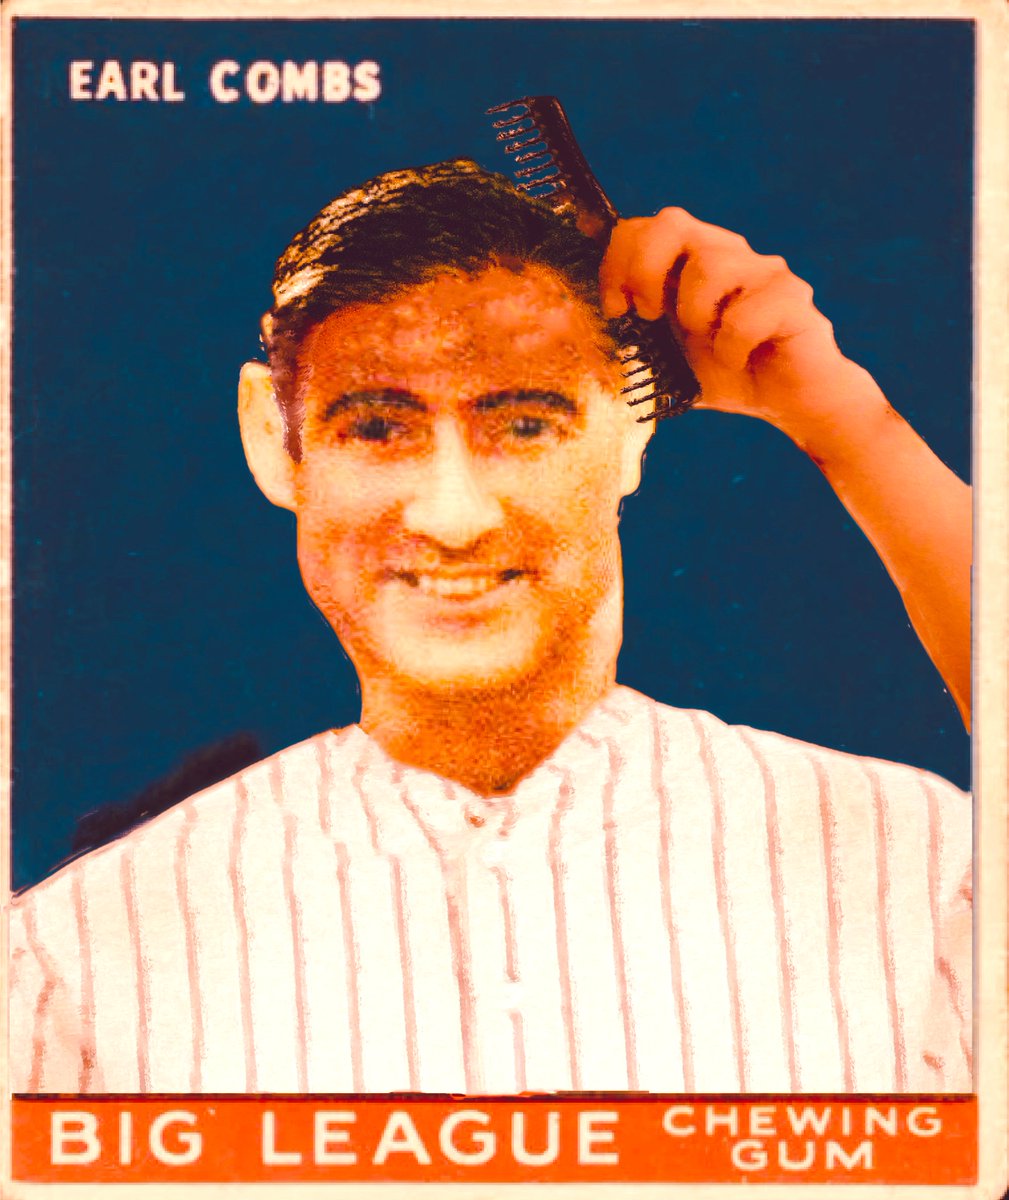 Born on this date in 1899, Earle “The Kentucky Colonel” Combs pulled rank on 8/17/1935 when he hit the final HR of his big league career off of General Crowder.